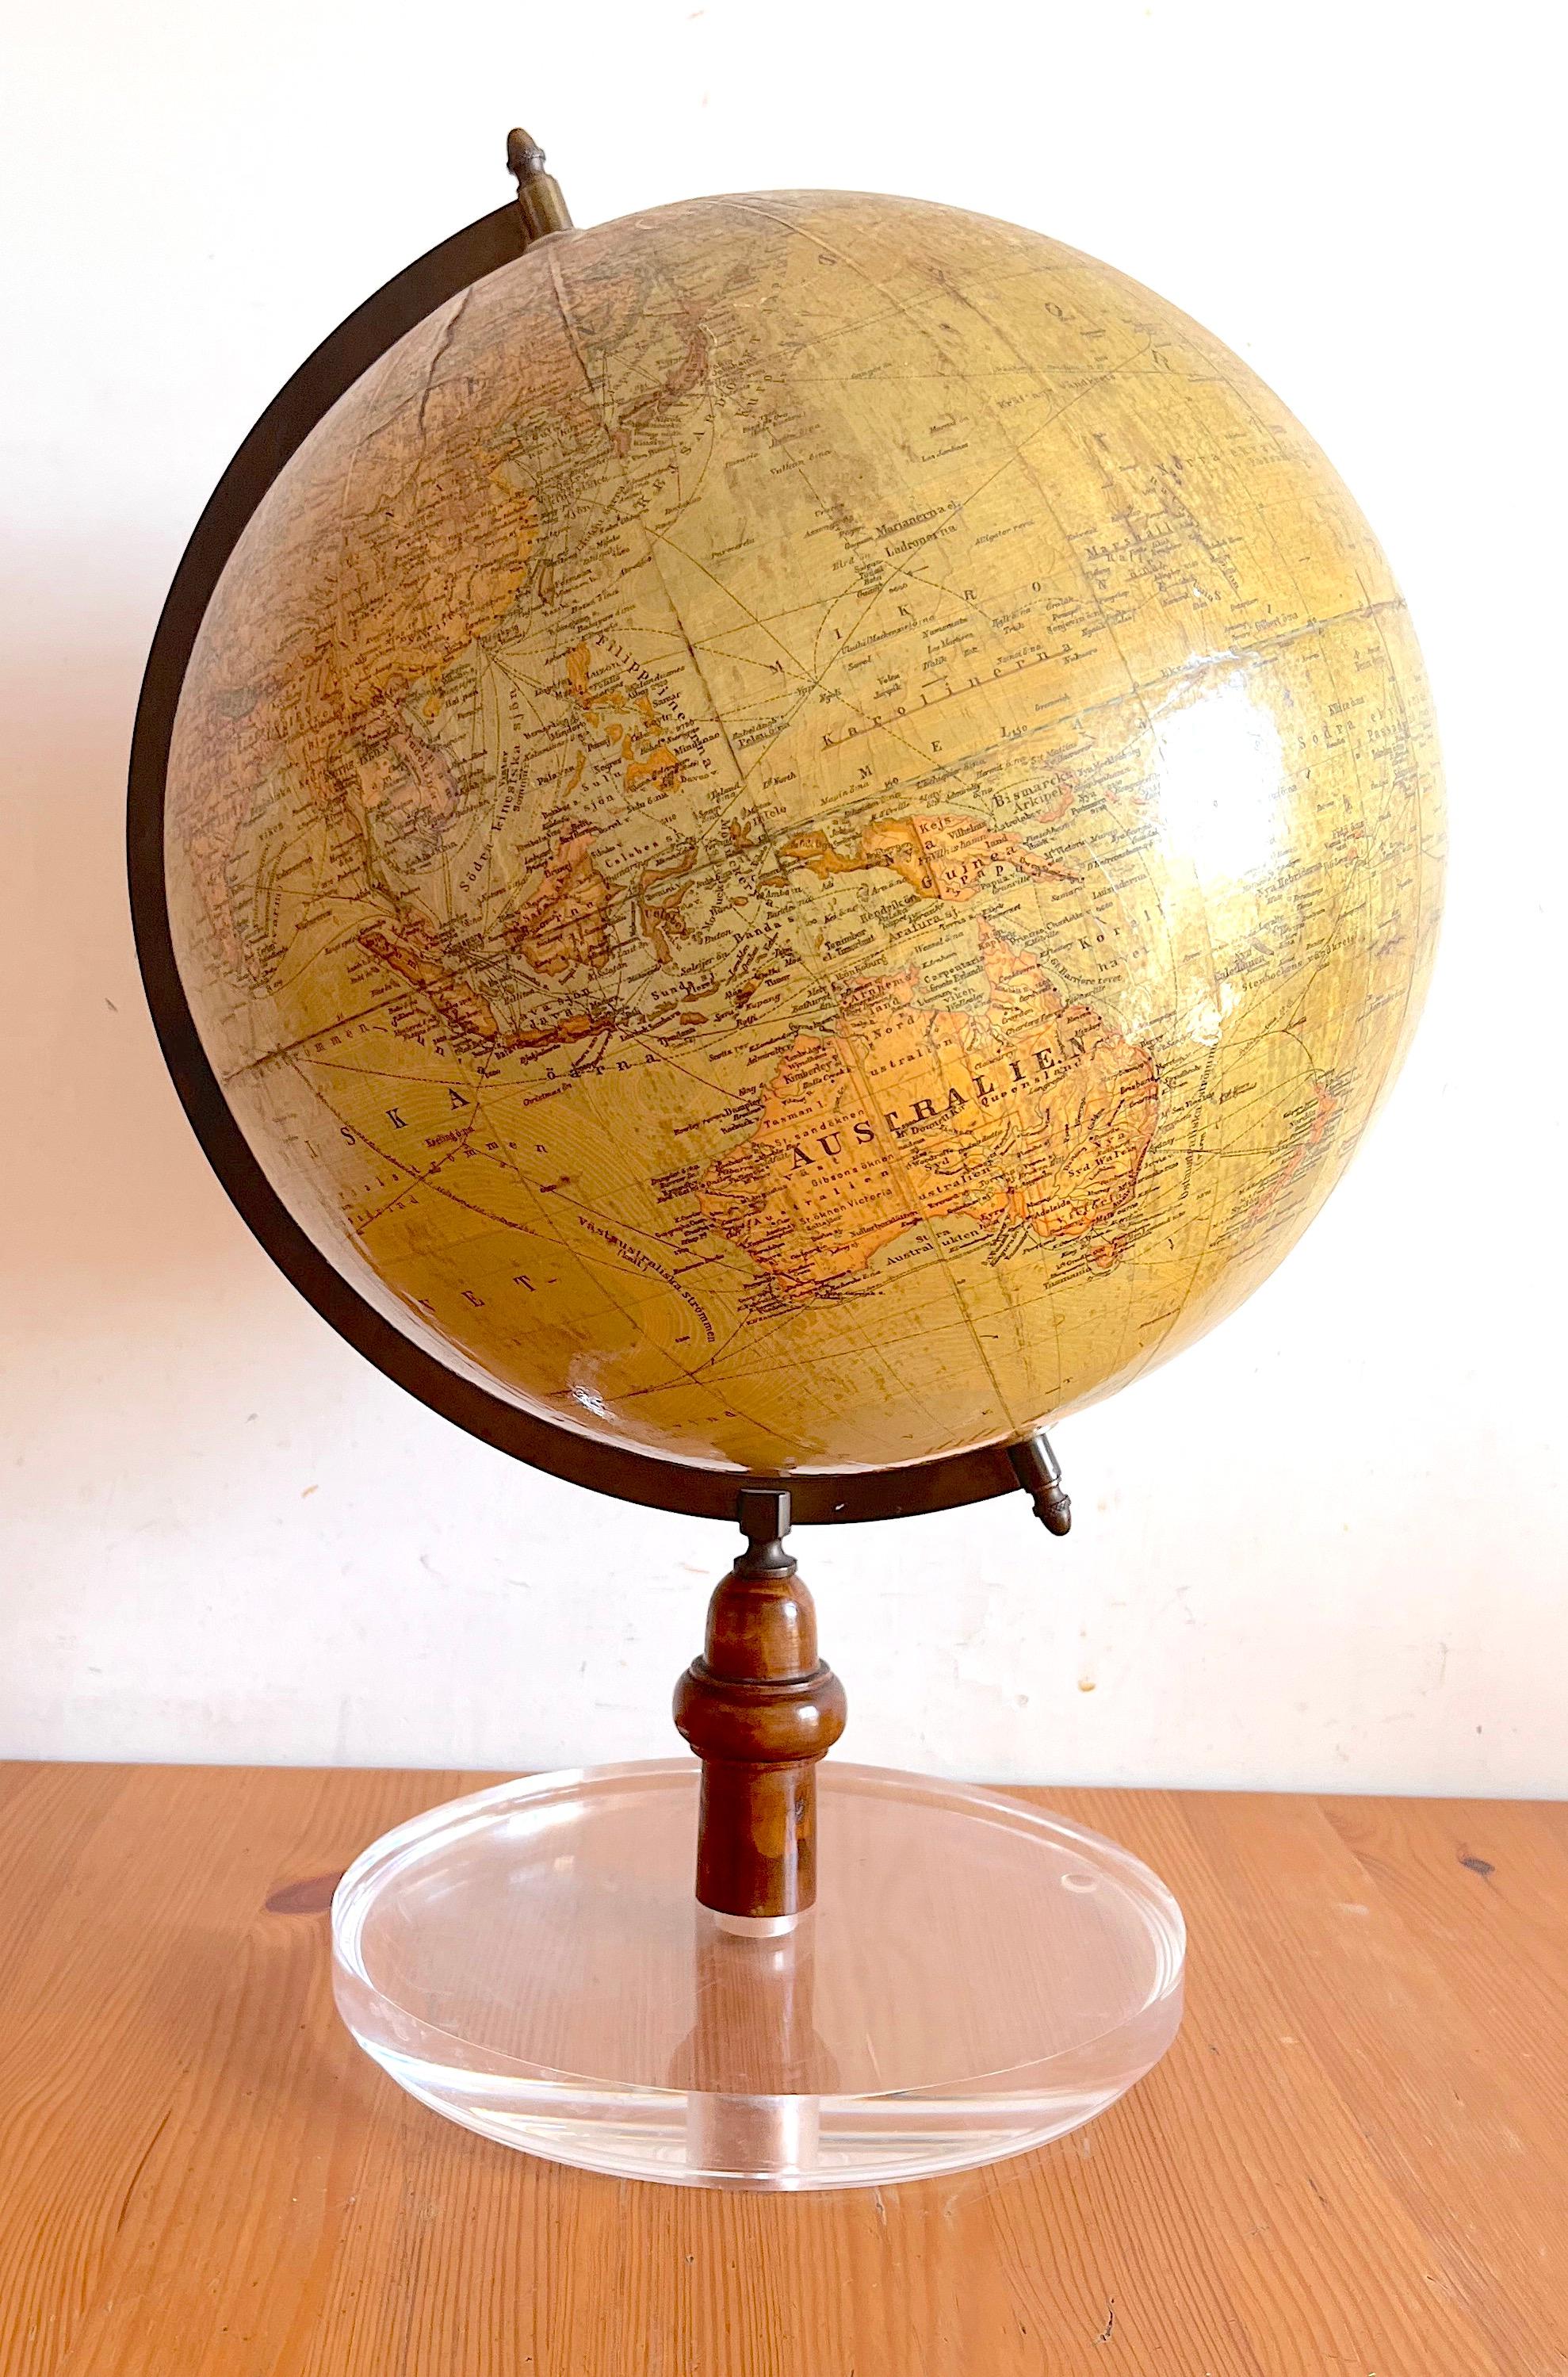 German school globe circa 1933. 
Diameter 32cm  
Elegant appearance with a beautiful color palette. Very well preserved
This globe was reworked by cartographer Dr. H. Fisscher
This globe was made by Wagner & Debes of Leipzig. Soon after the turn of